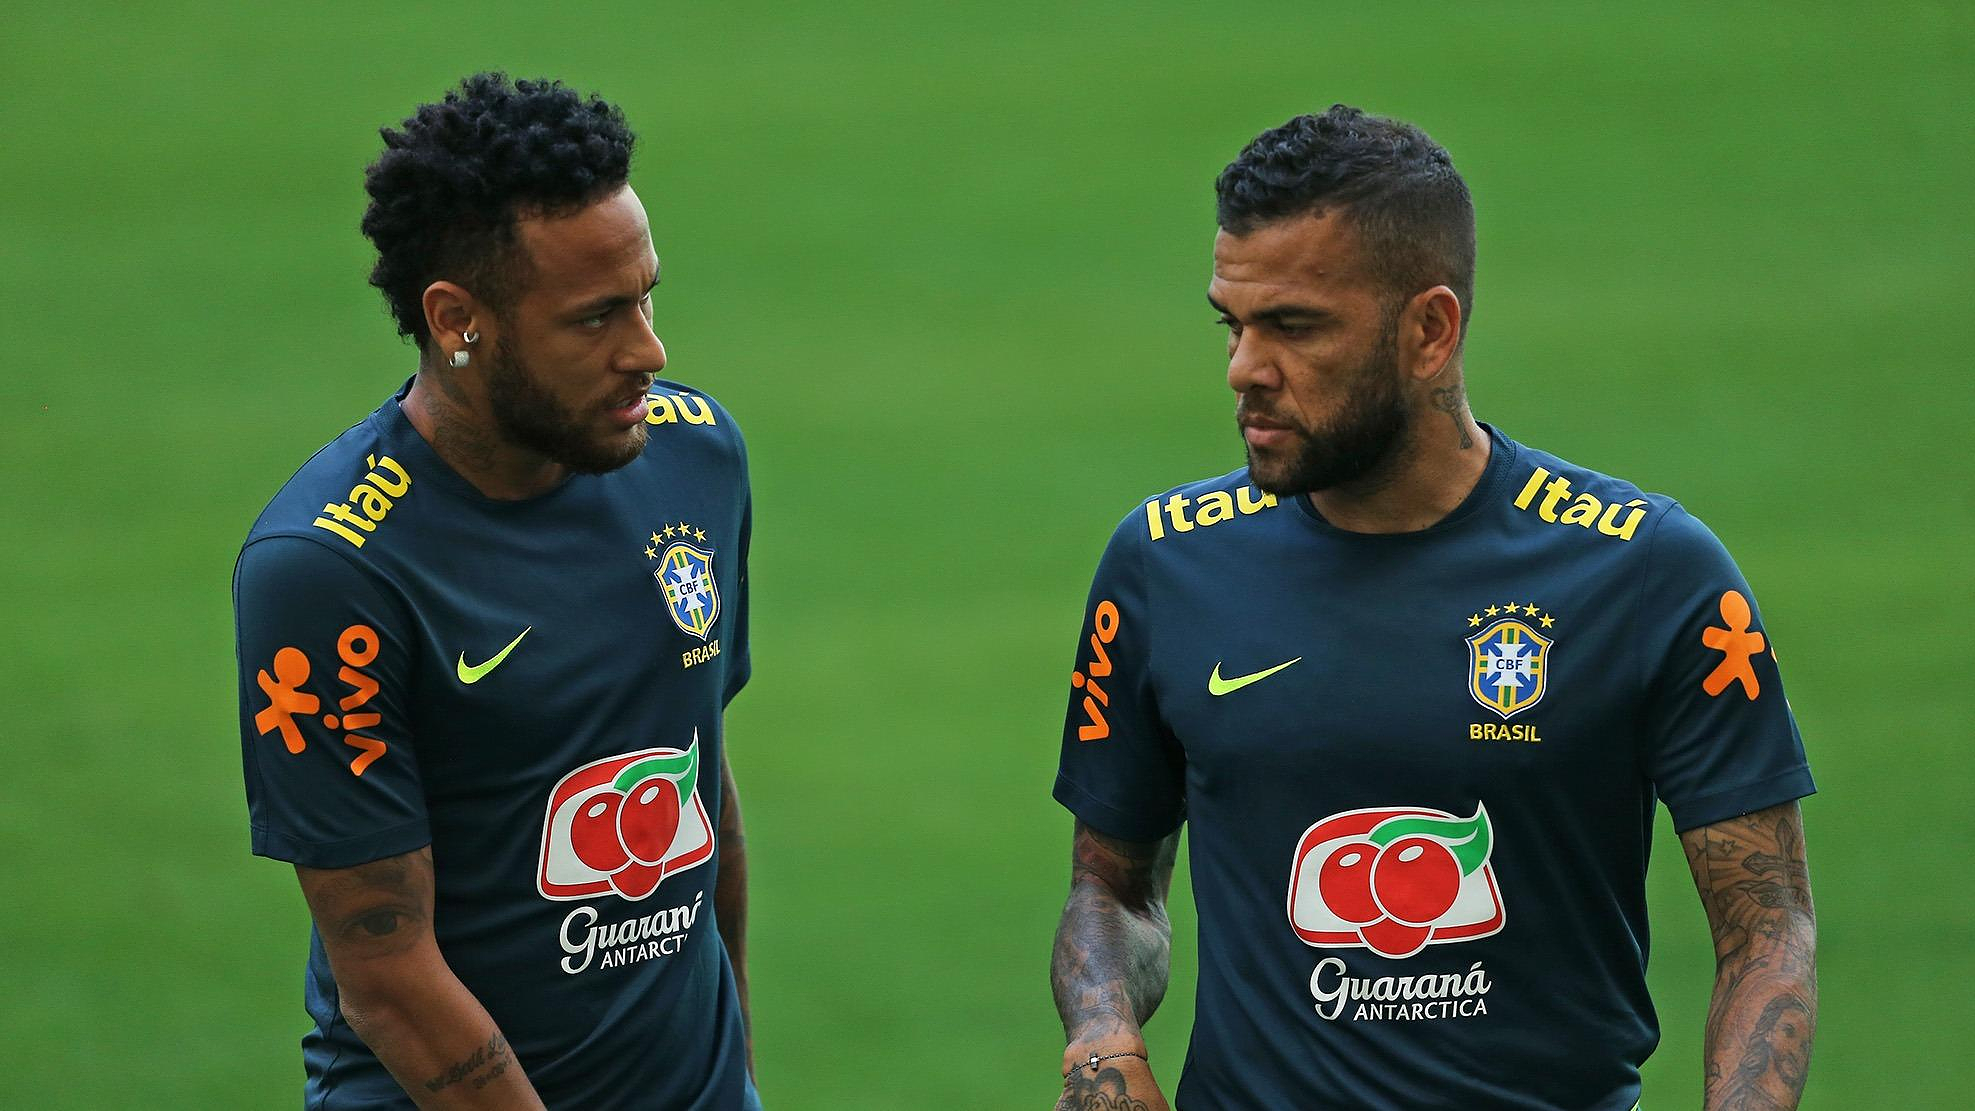 Football: Neymar's father says he will not pay Dani Alves' one million euro bail